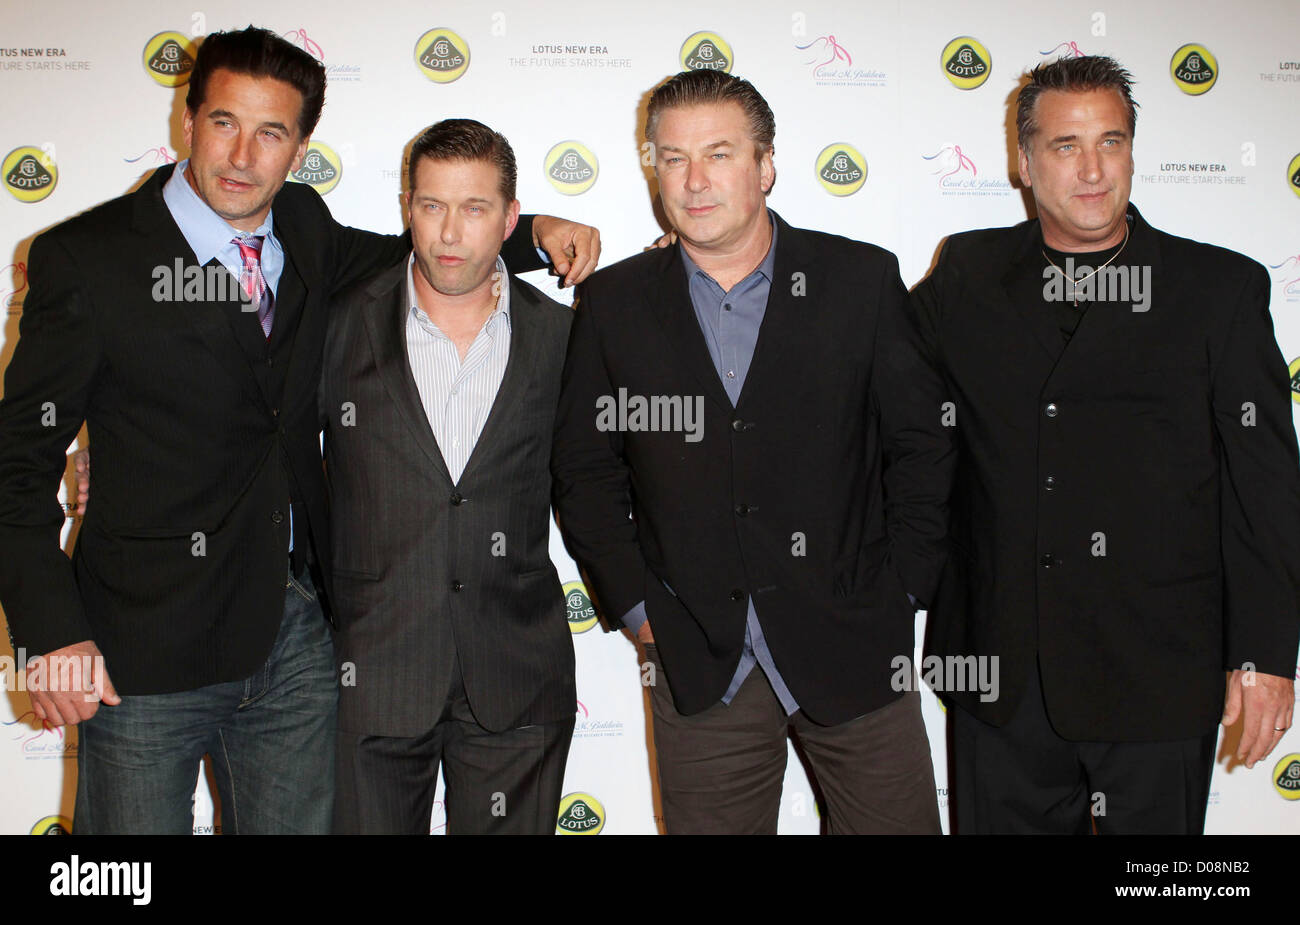 Brothers Billy Baldwin, Stephen Baldwin, Alec Baldwin and Daniel Baldwin U.S Launch Event for New Lotus Cars held at a Private Stock Photo